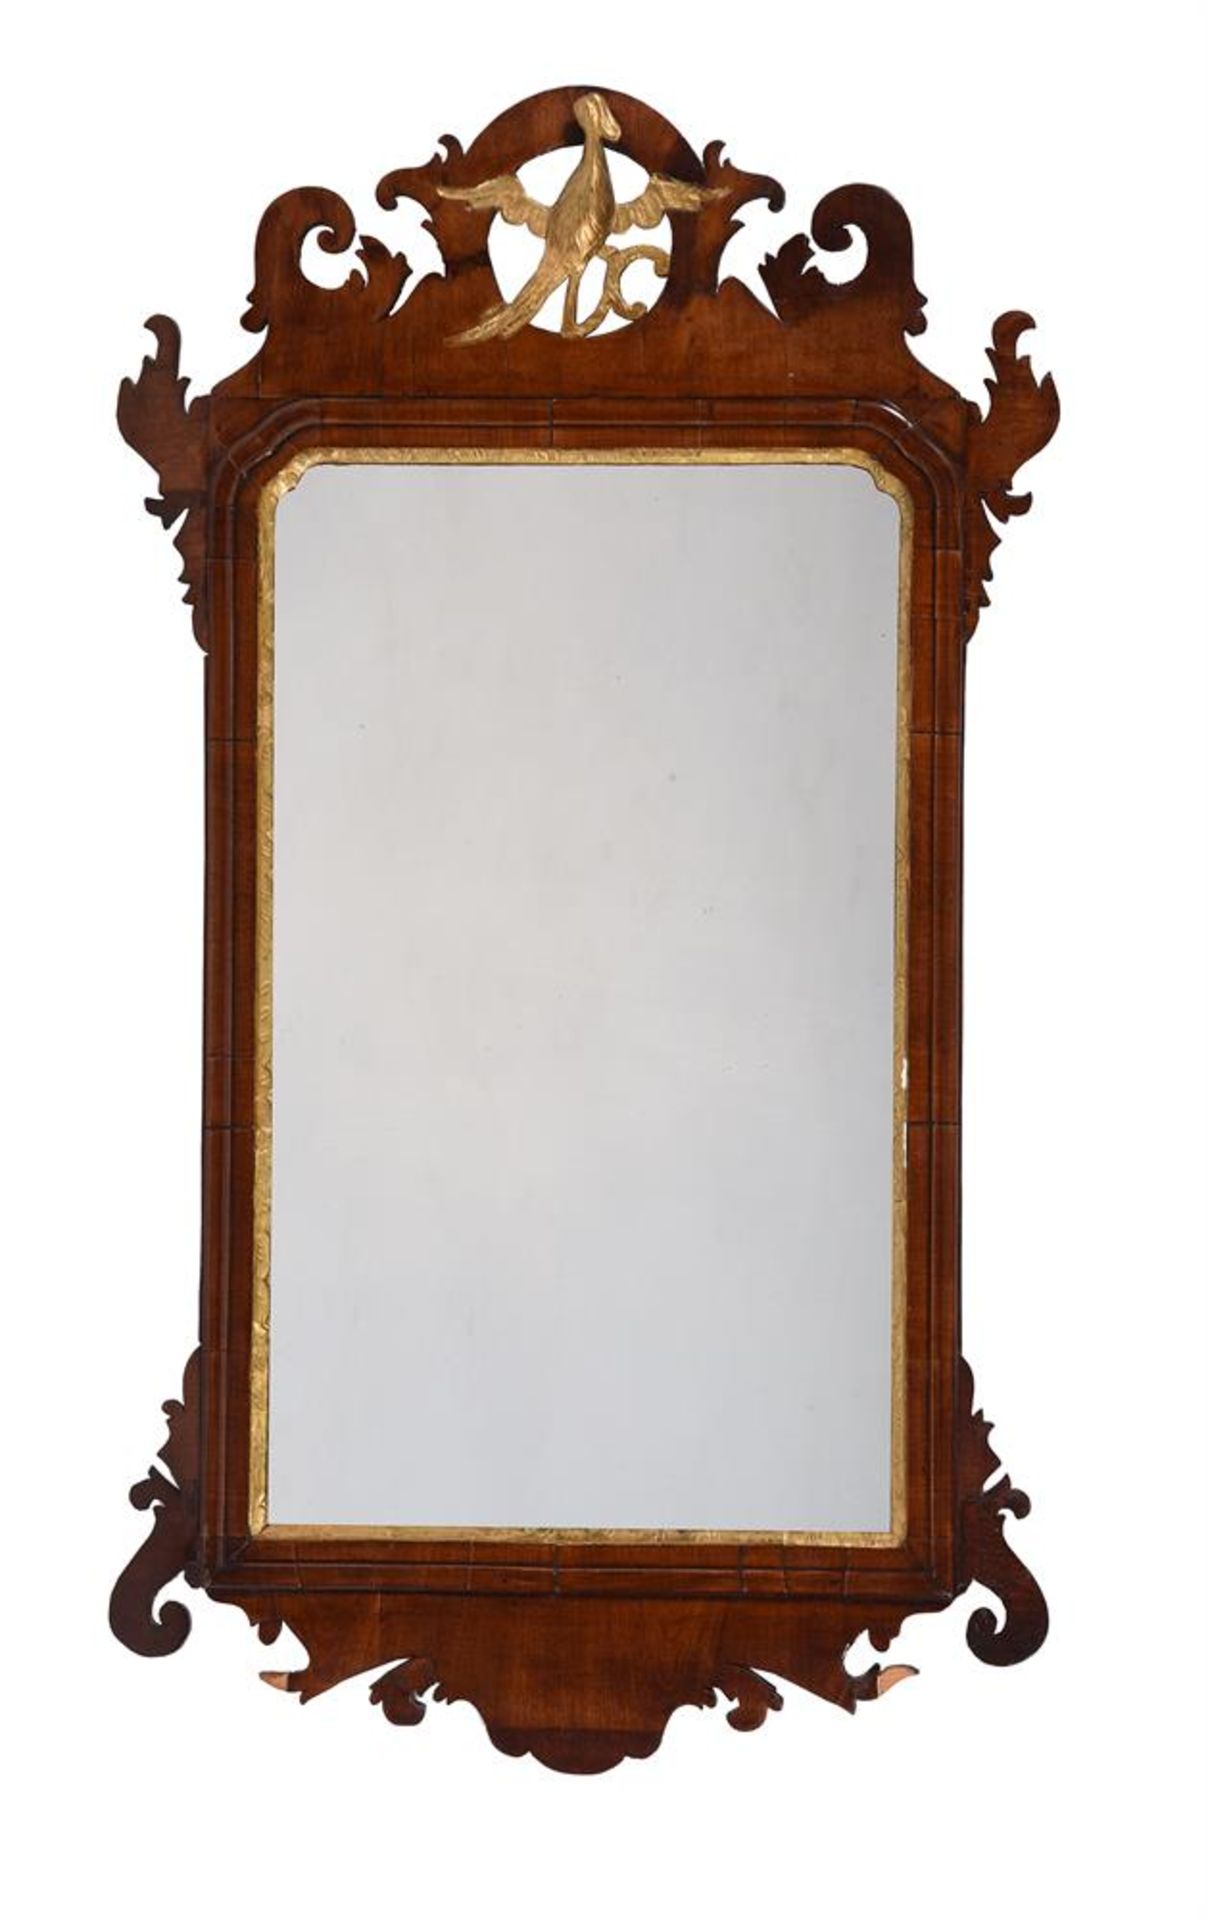 TWO MAHOGANY AND PARCEL GILT FRET WALL MIRRORS